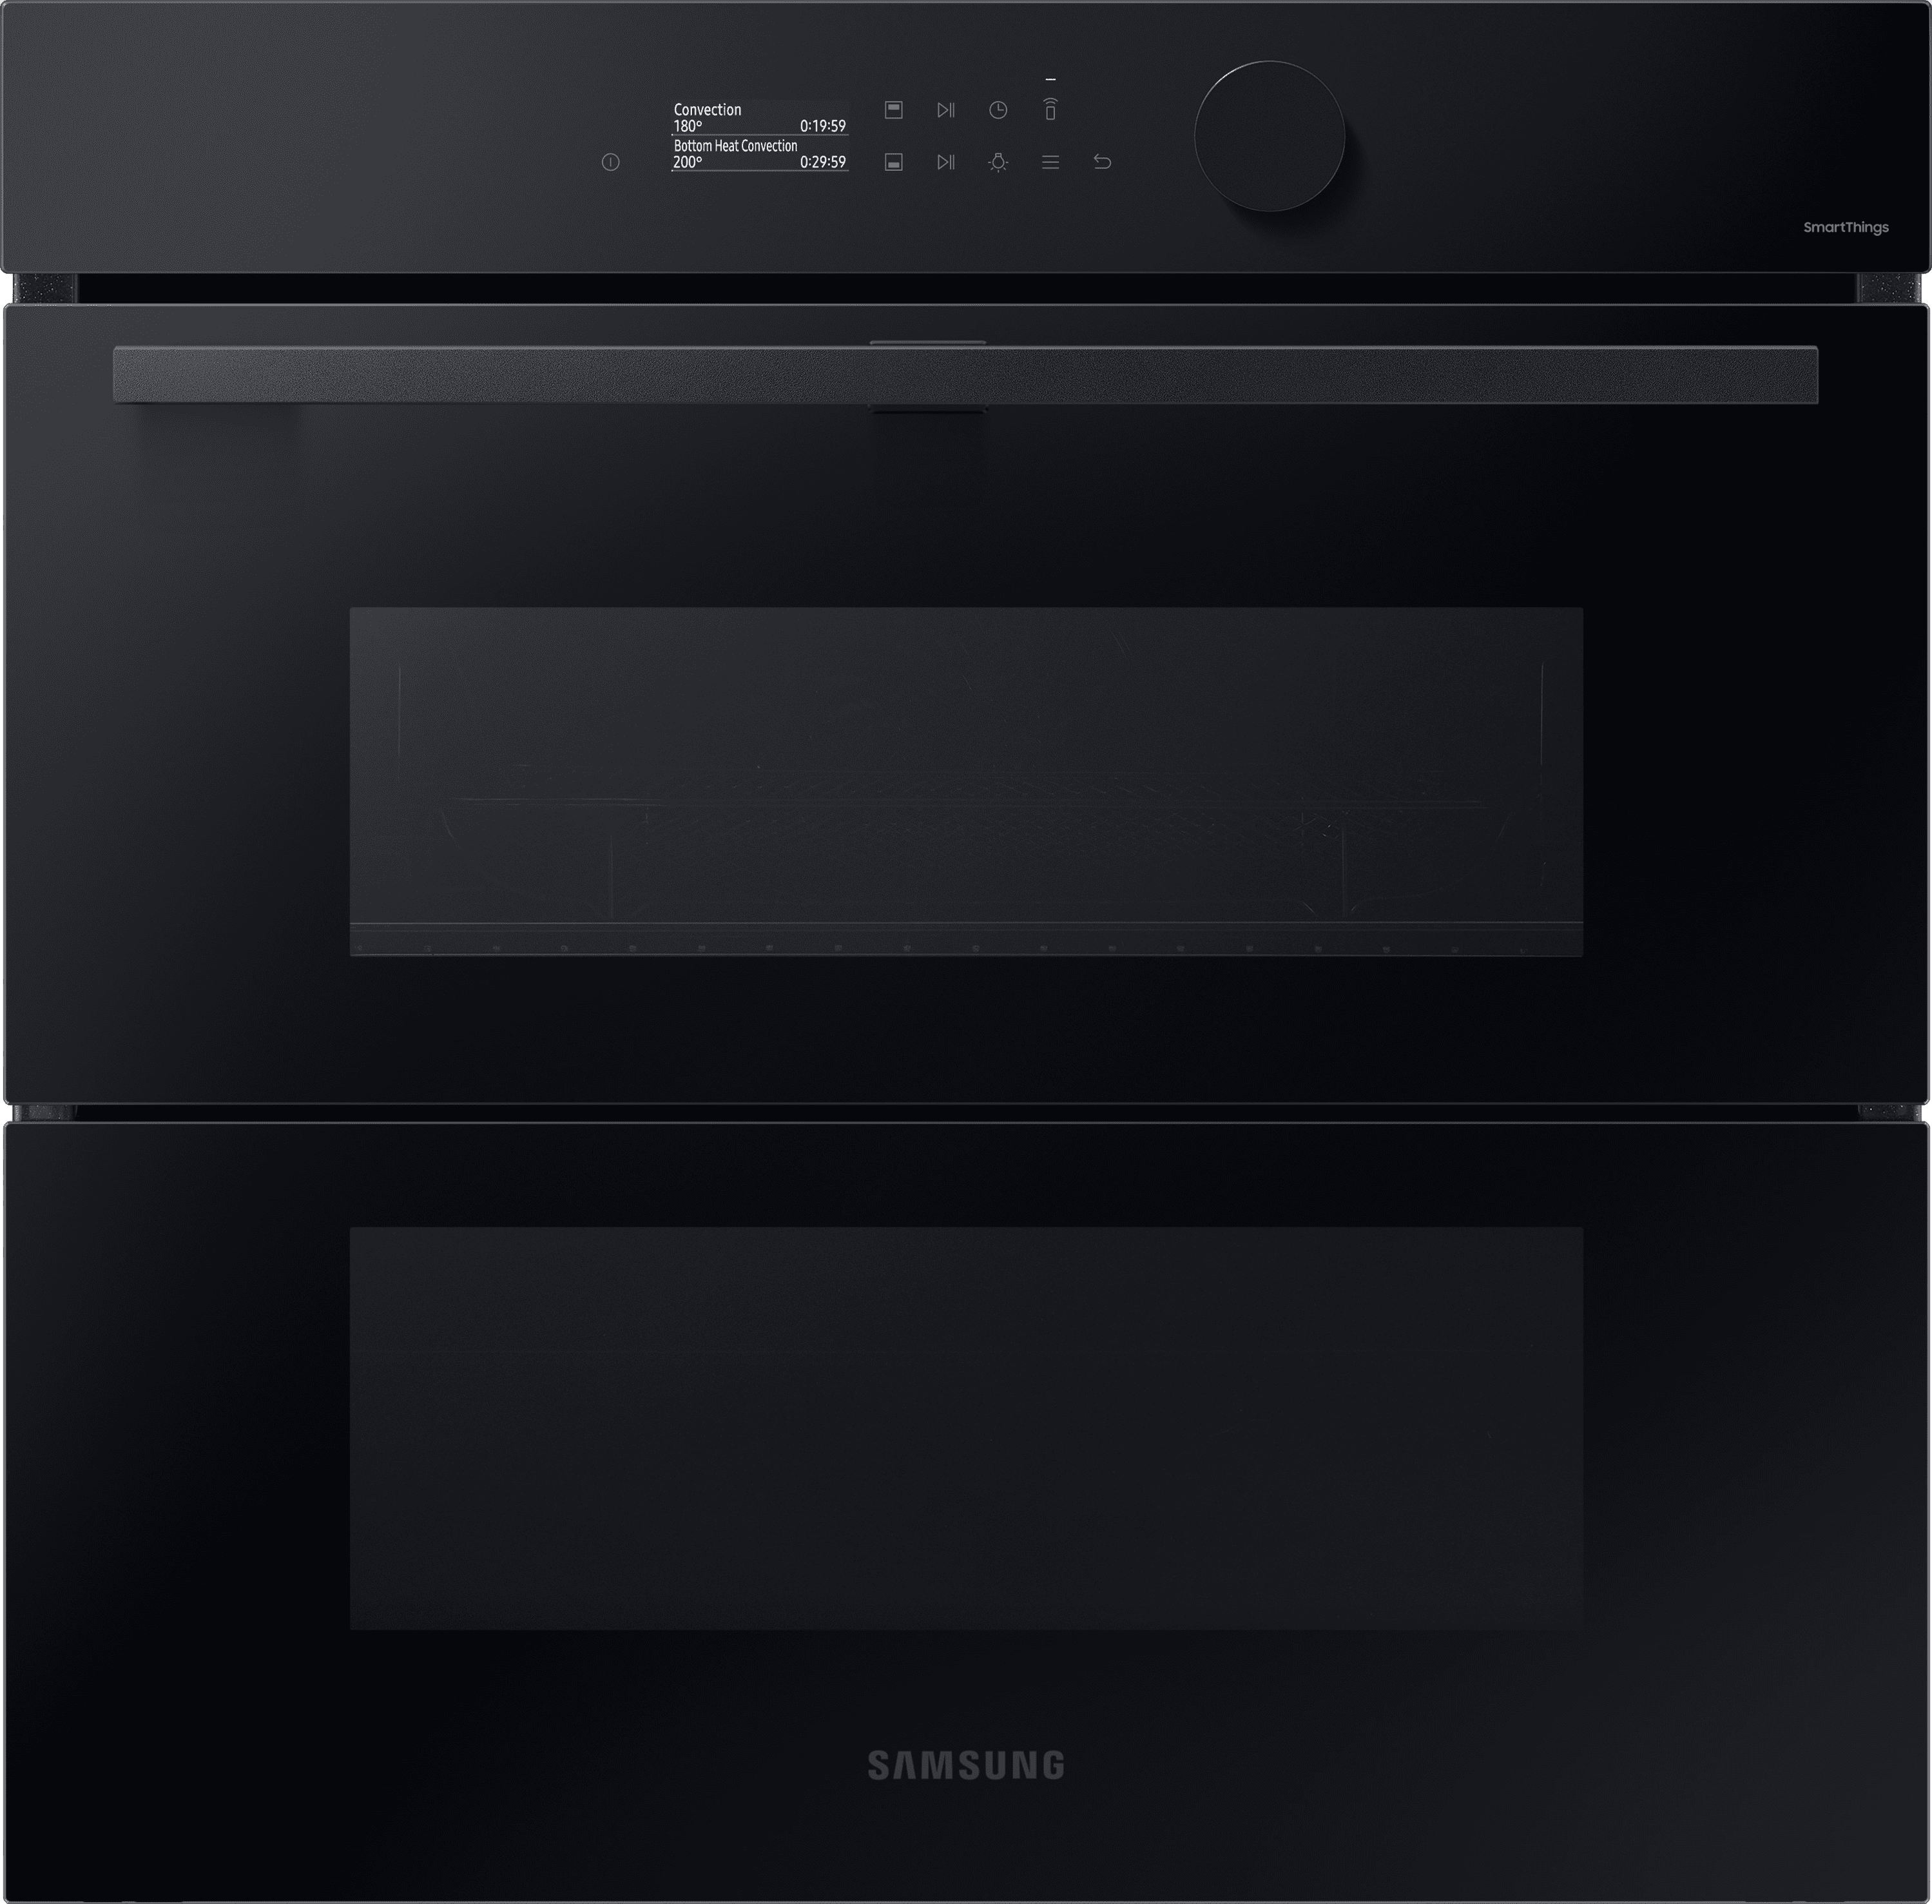 Samsung Series 5 Dual Cook Flex NV7B5750TAK Wifi Connected Built In Electric Single Oven and Pyrolytic Cleaning - Black Glass - A+ Rated, Black